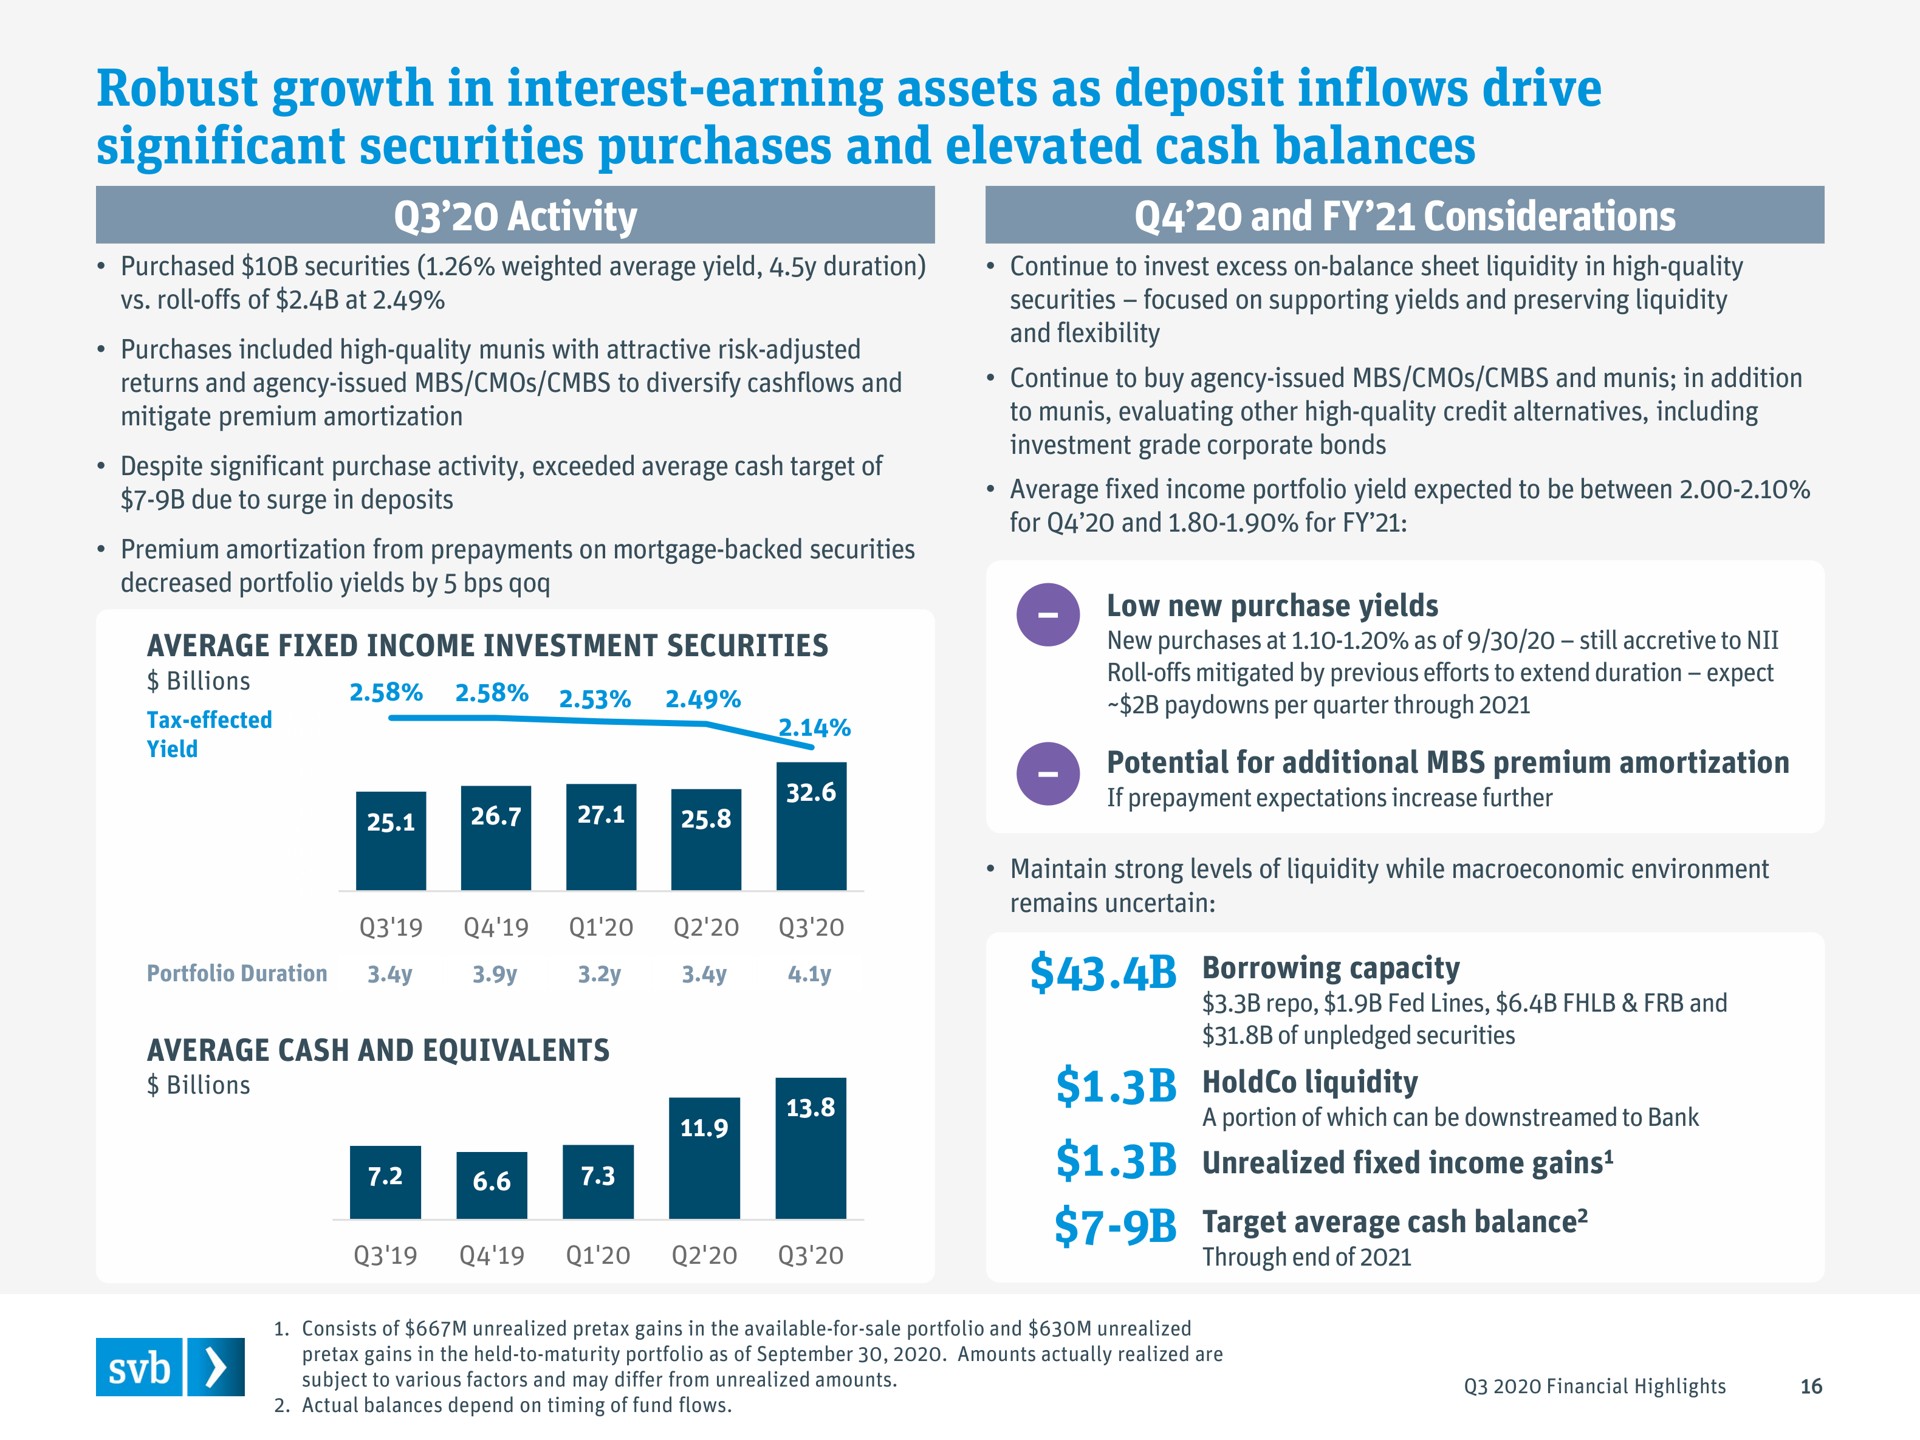 robust growth in interest earning assets as deposit inflows drive significant securities purchases and elevated cash balances | Silicon Valley Bank